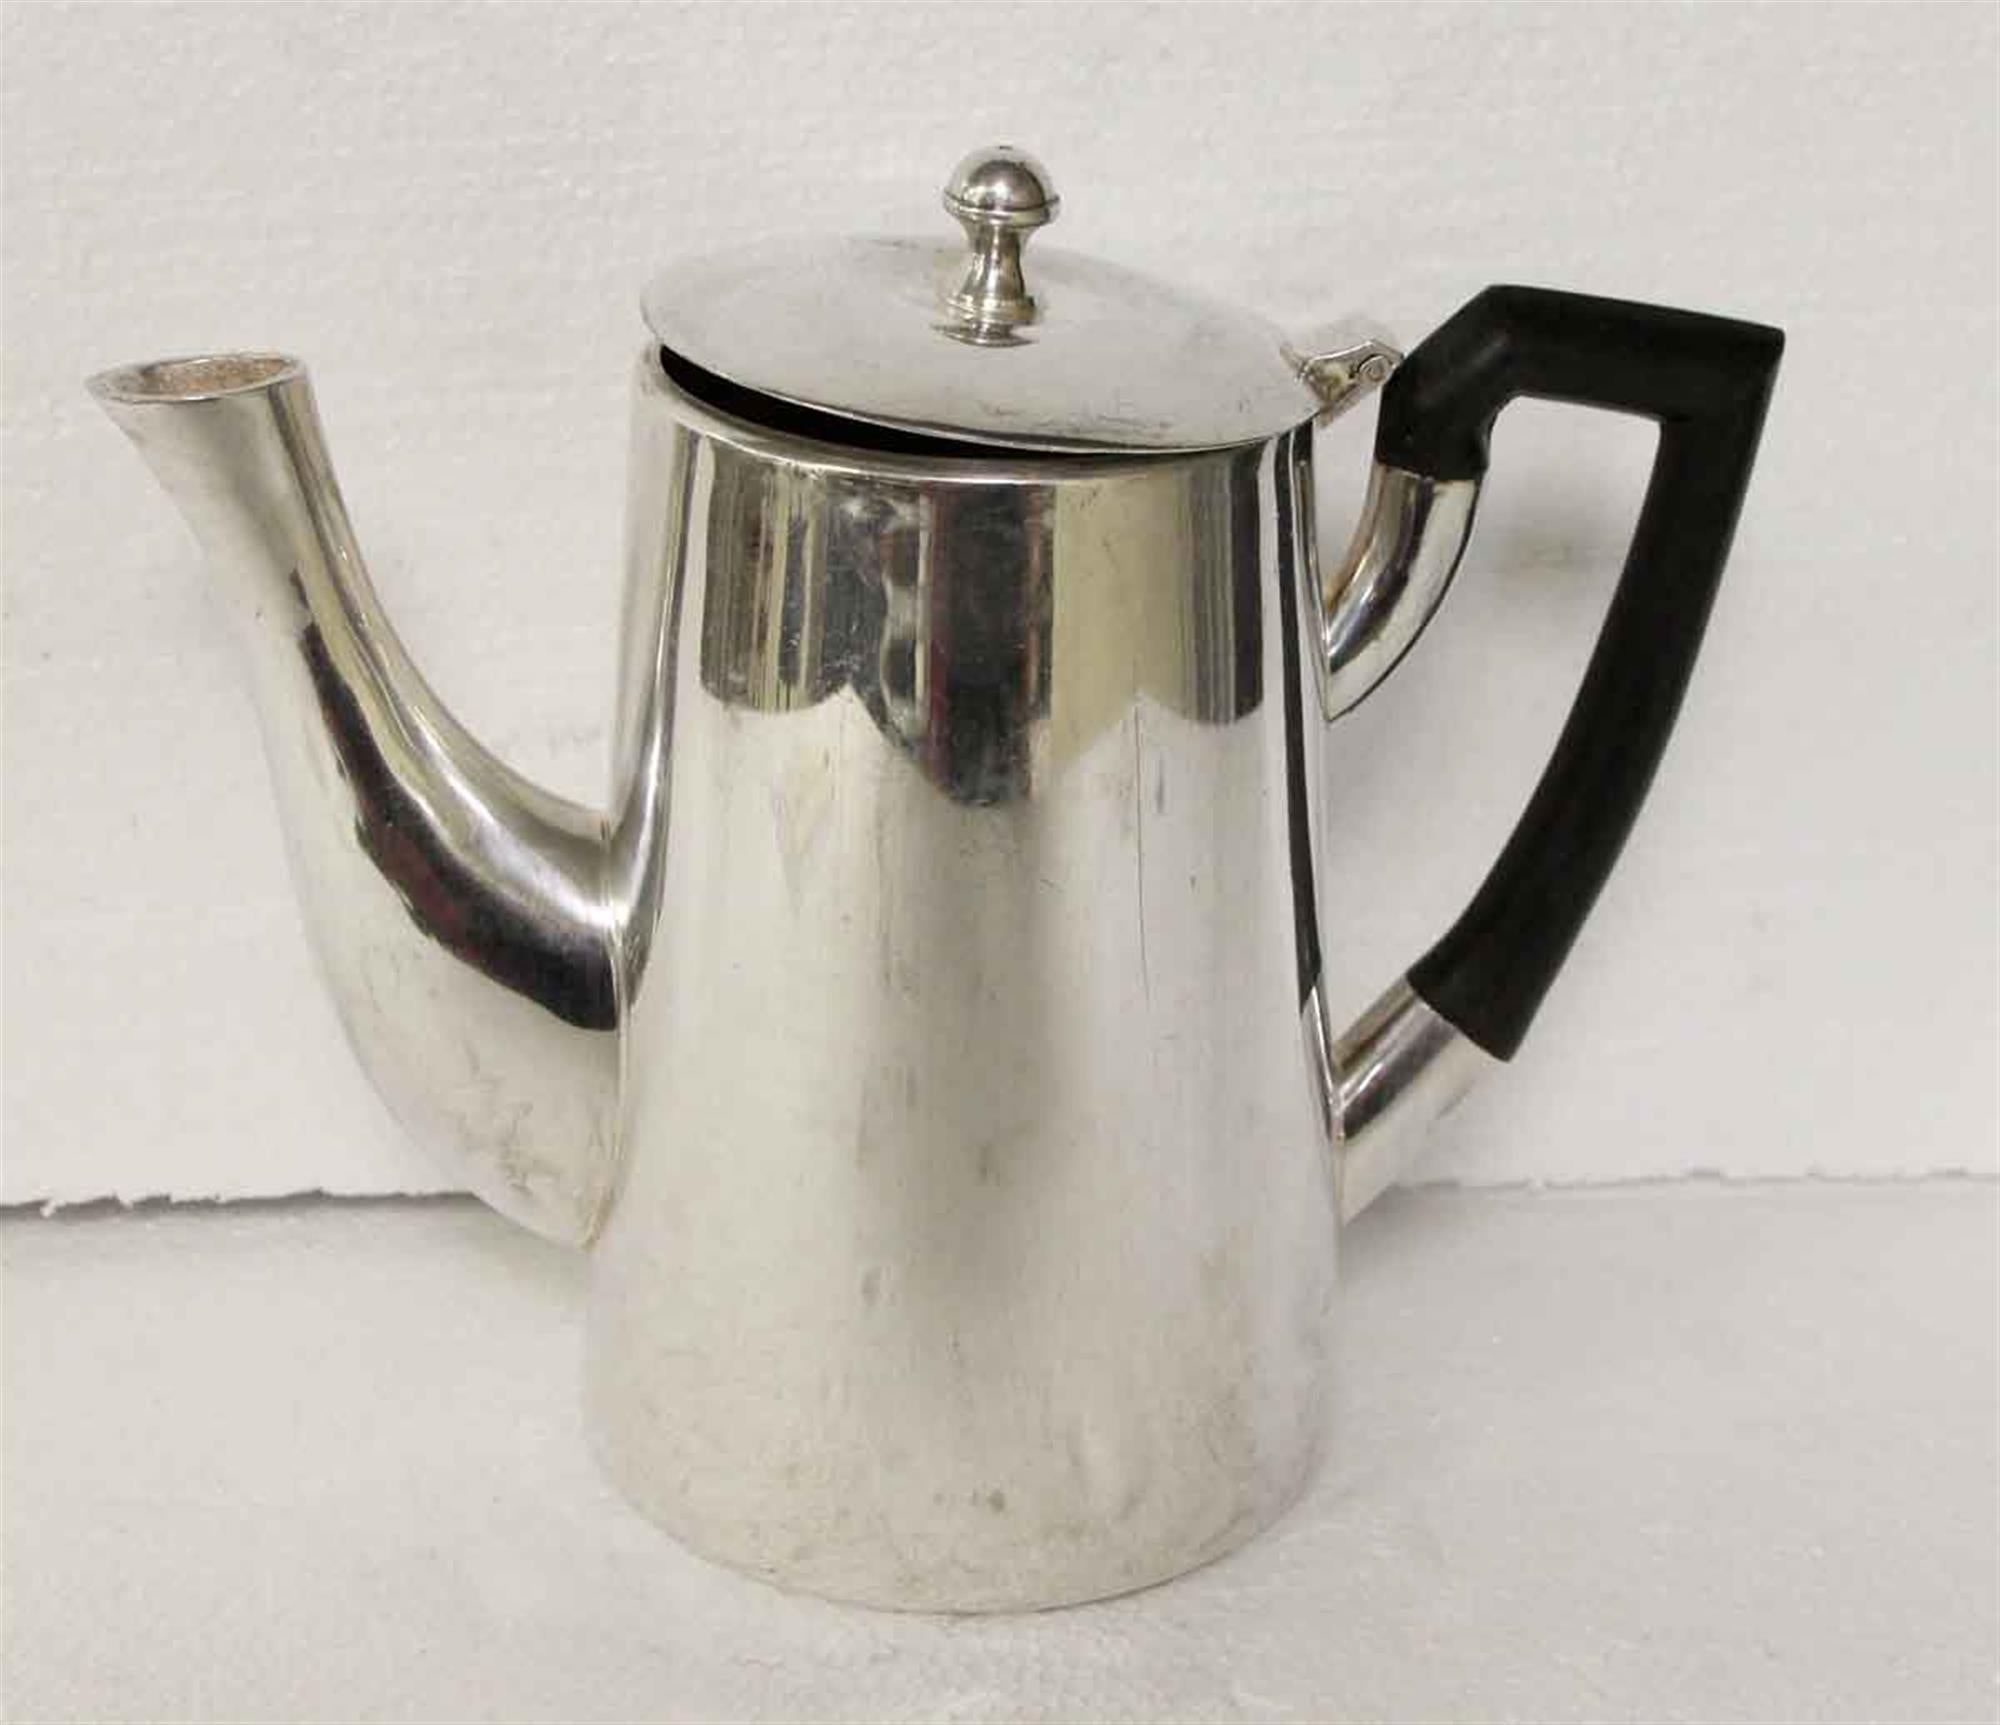 1950s silver plated tea pot with lid and black handle done in a Mid-Century Modern style. Each pot shows wear from use in the hotel. Waldorf Astoria authenticity card included with your purchase. Small quantity available at time of posting. Please